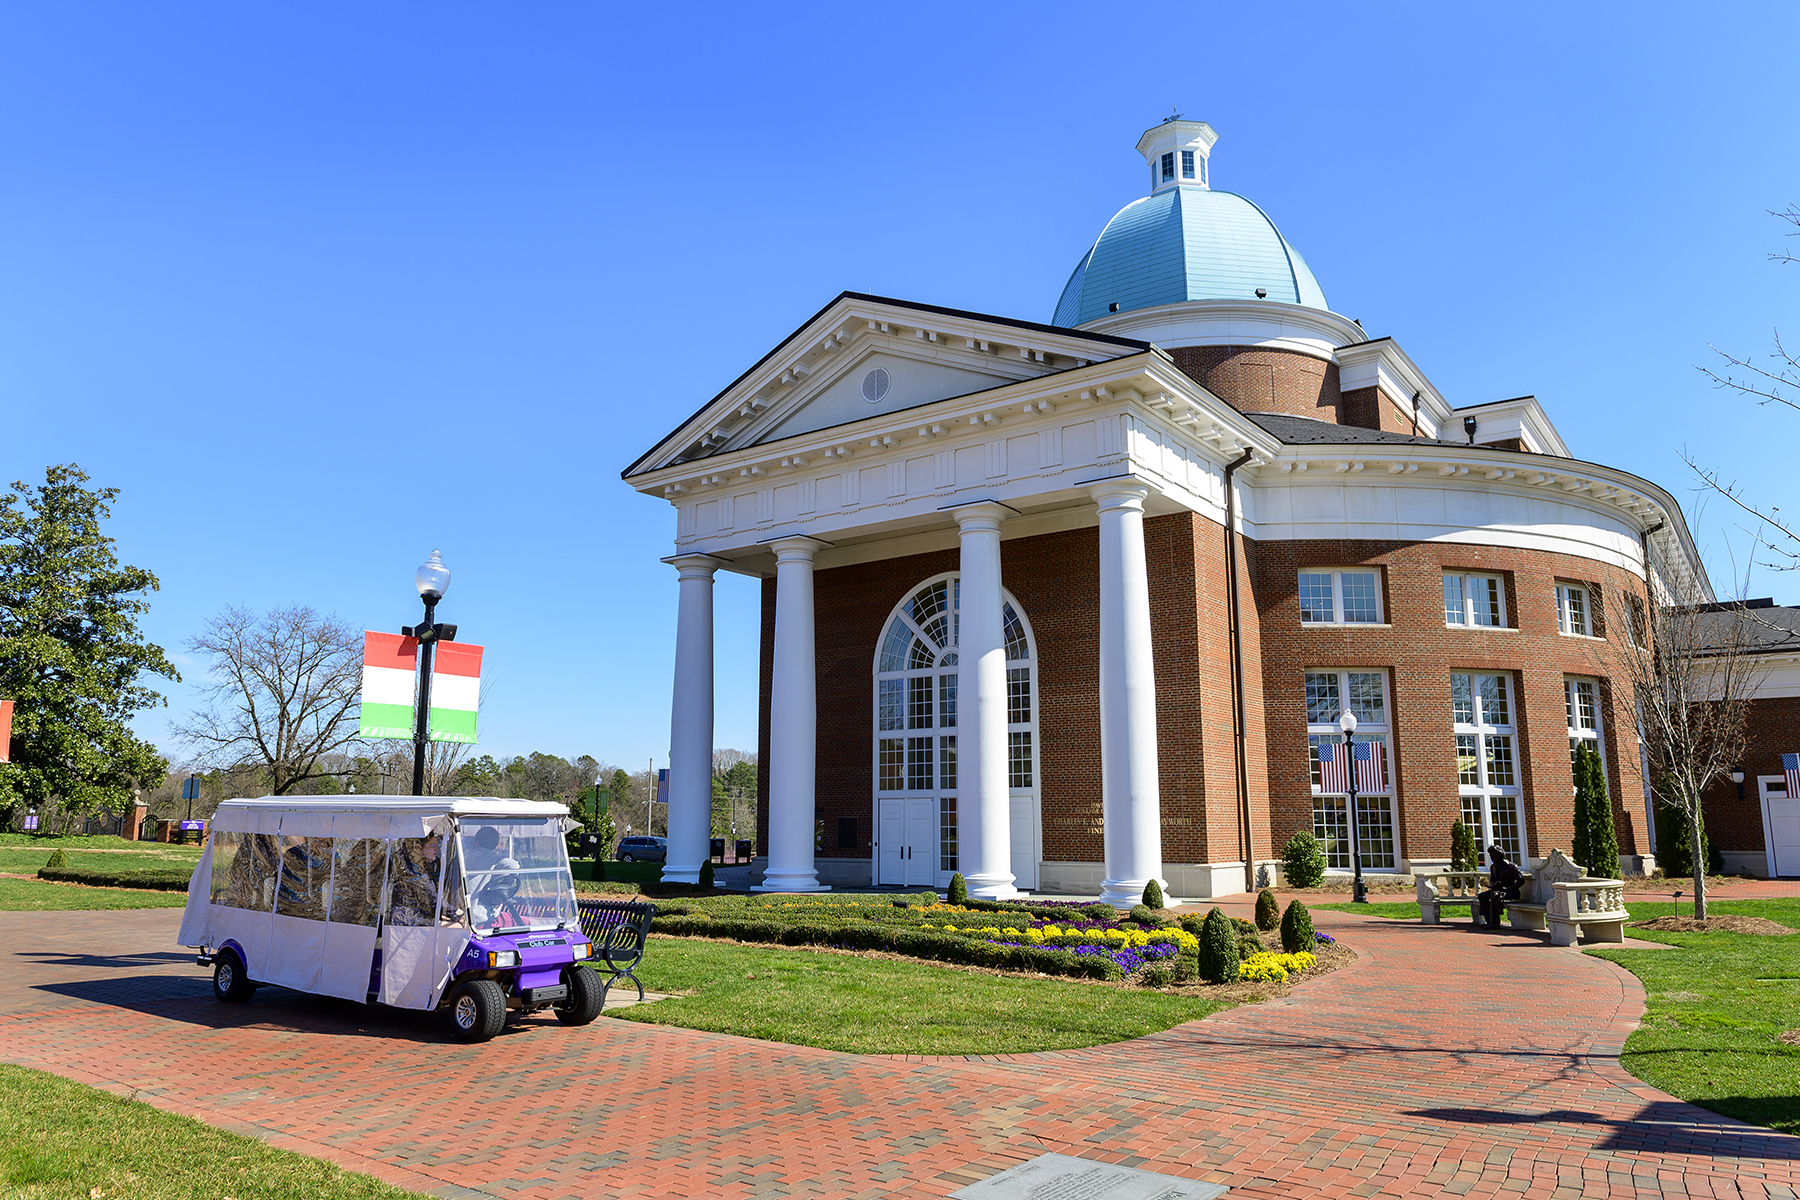 At High Point University, the visitor experience is personalized to a student’s interest in specific majors. By providing the campus tour on a golf cart as opposed to large walking groups, visitors can speak directly with a university ambassador and have their questions answered.